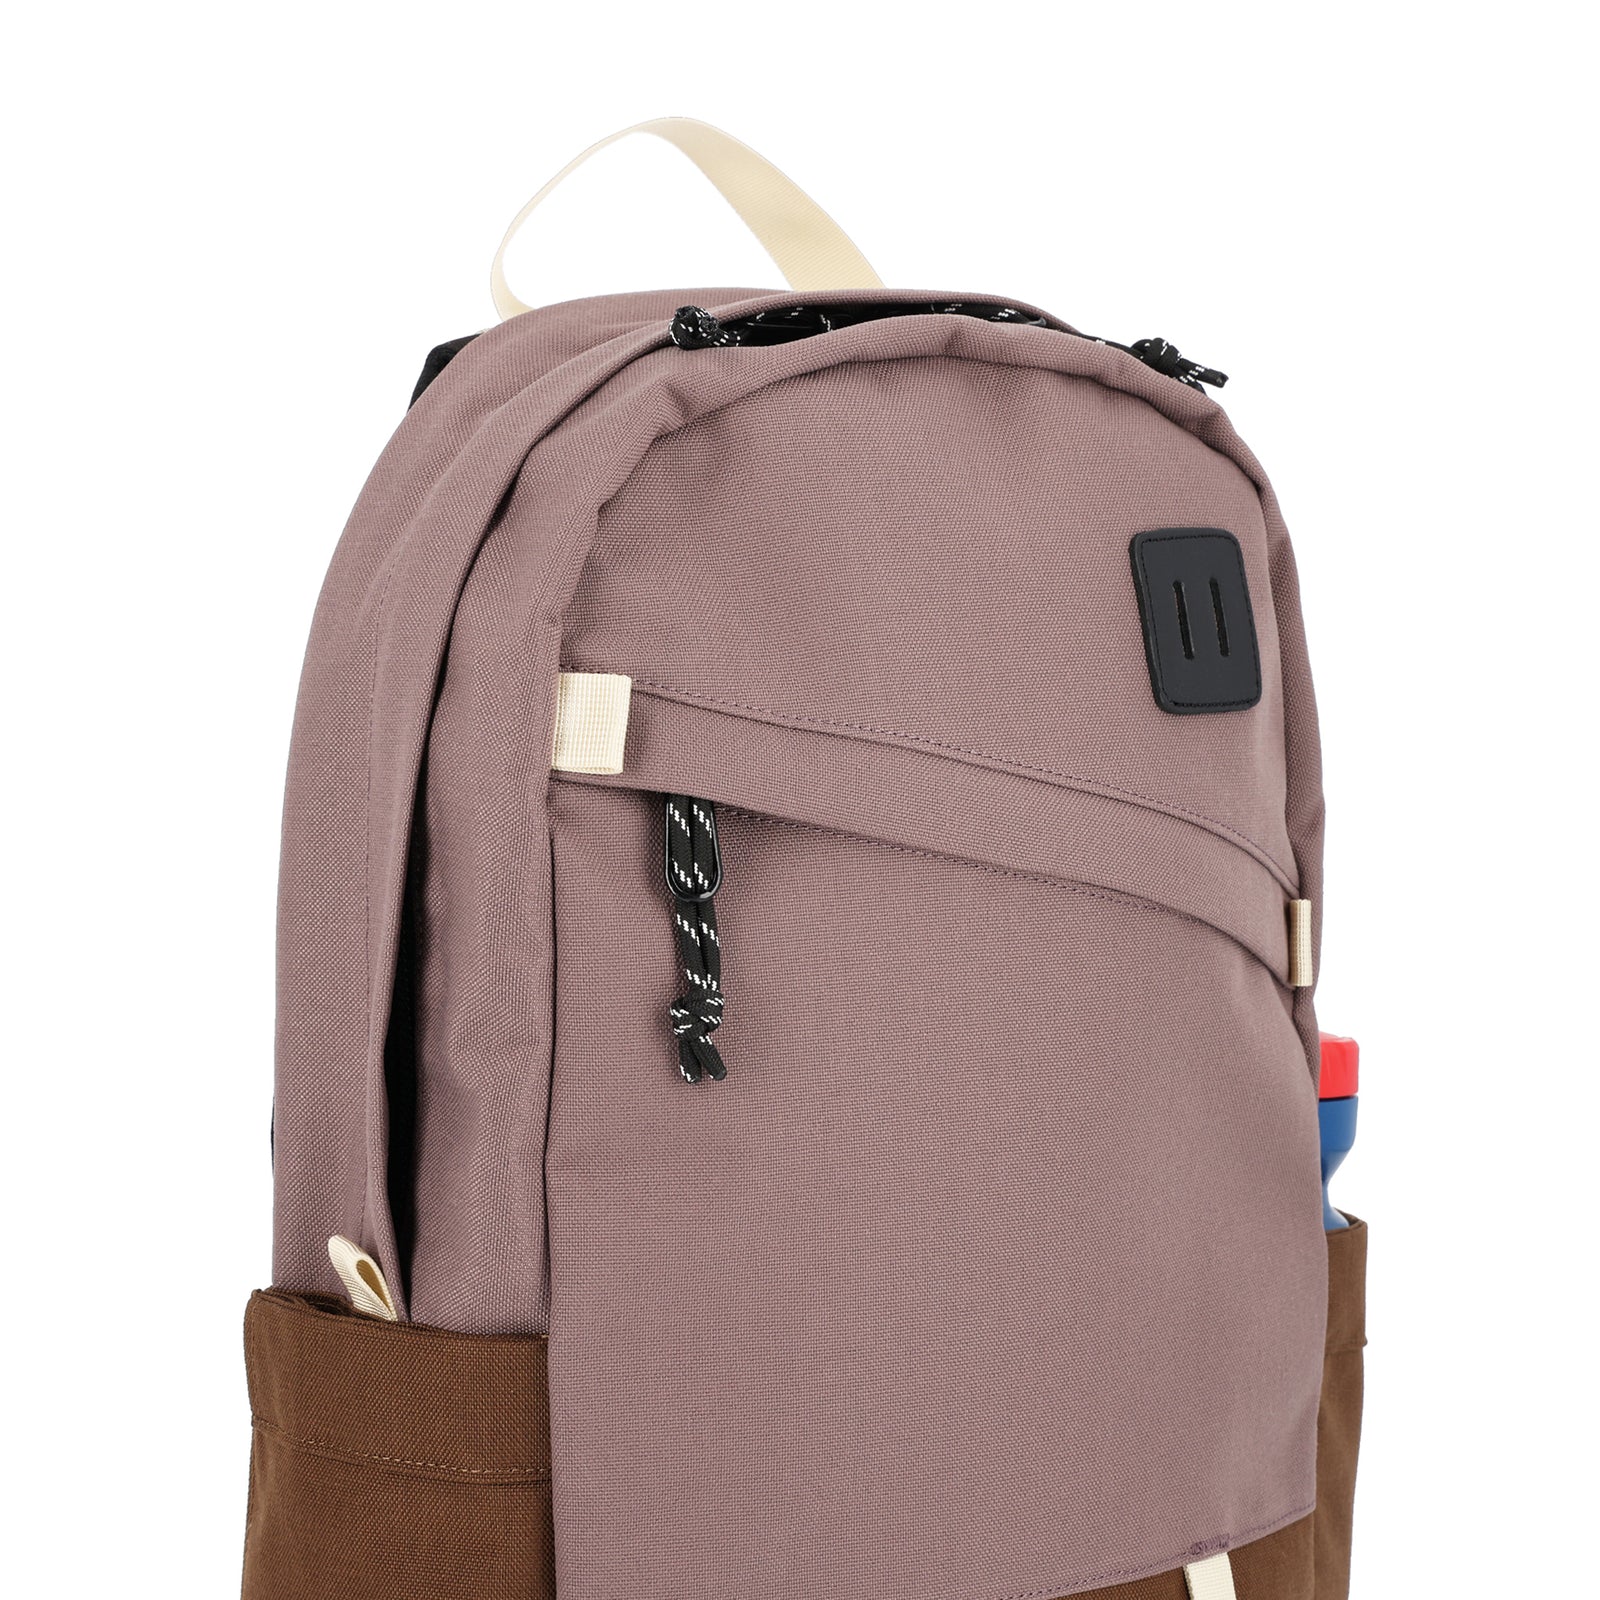 General detail of Topo Designs Daypack Classic 100% recycled nylon laptop backpack for work or school in "Peppercorn / Cocoa" purple brown